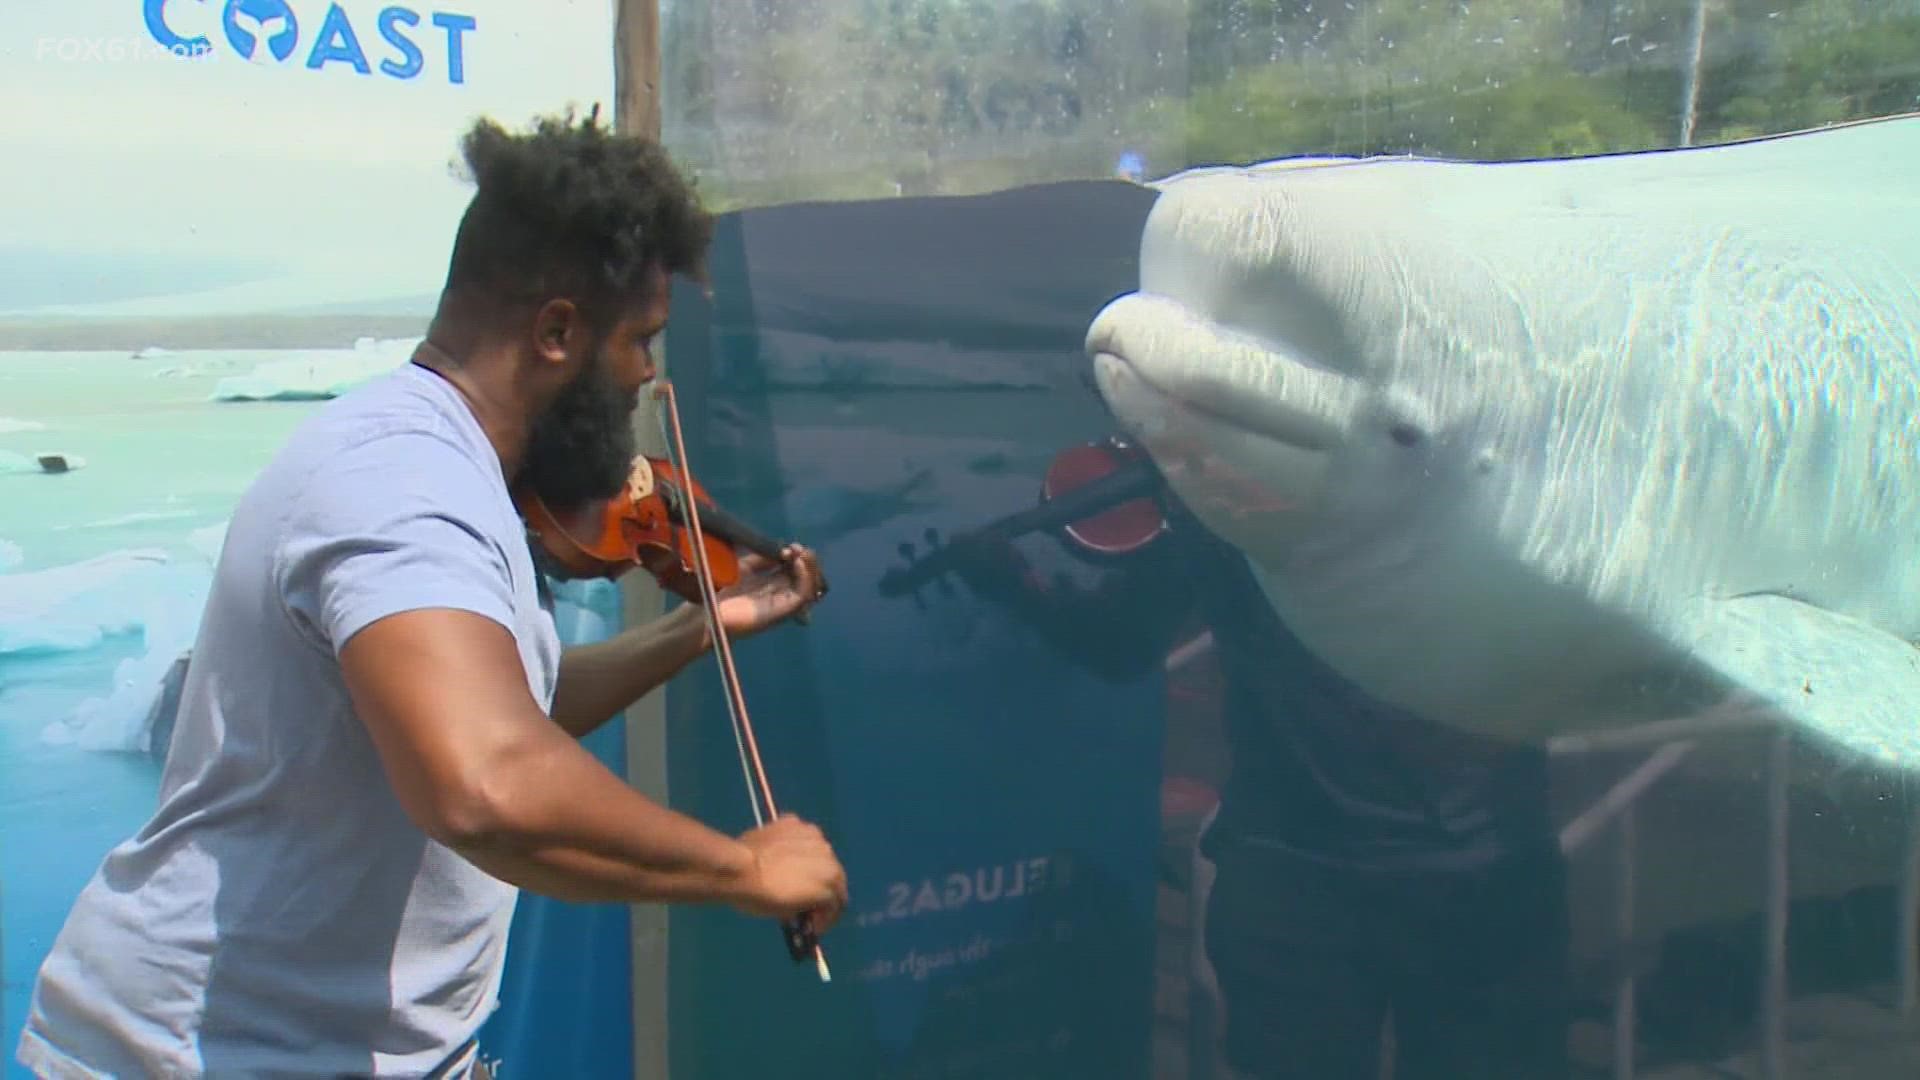 Kevin Lowther II is the professional violinist known as Big Lux -- and Big Lux has been bringing his violin to play for the Beluga Whales.